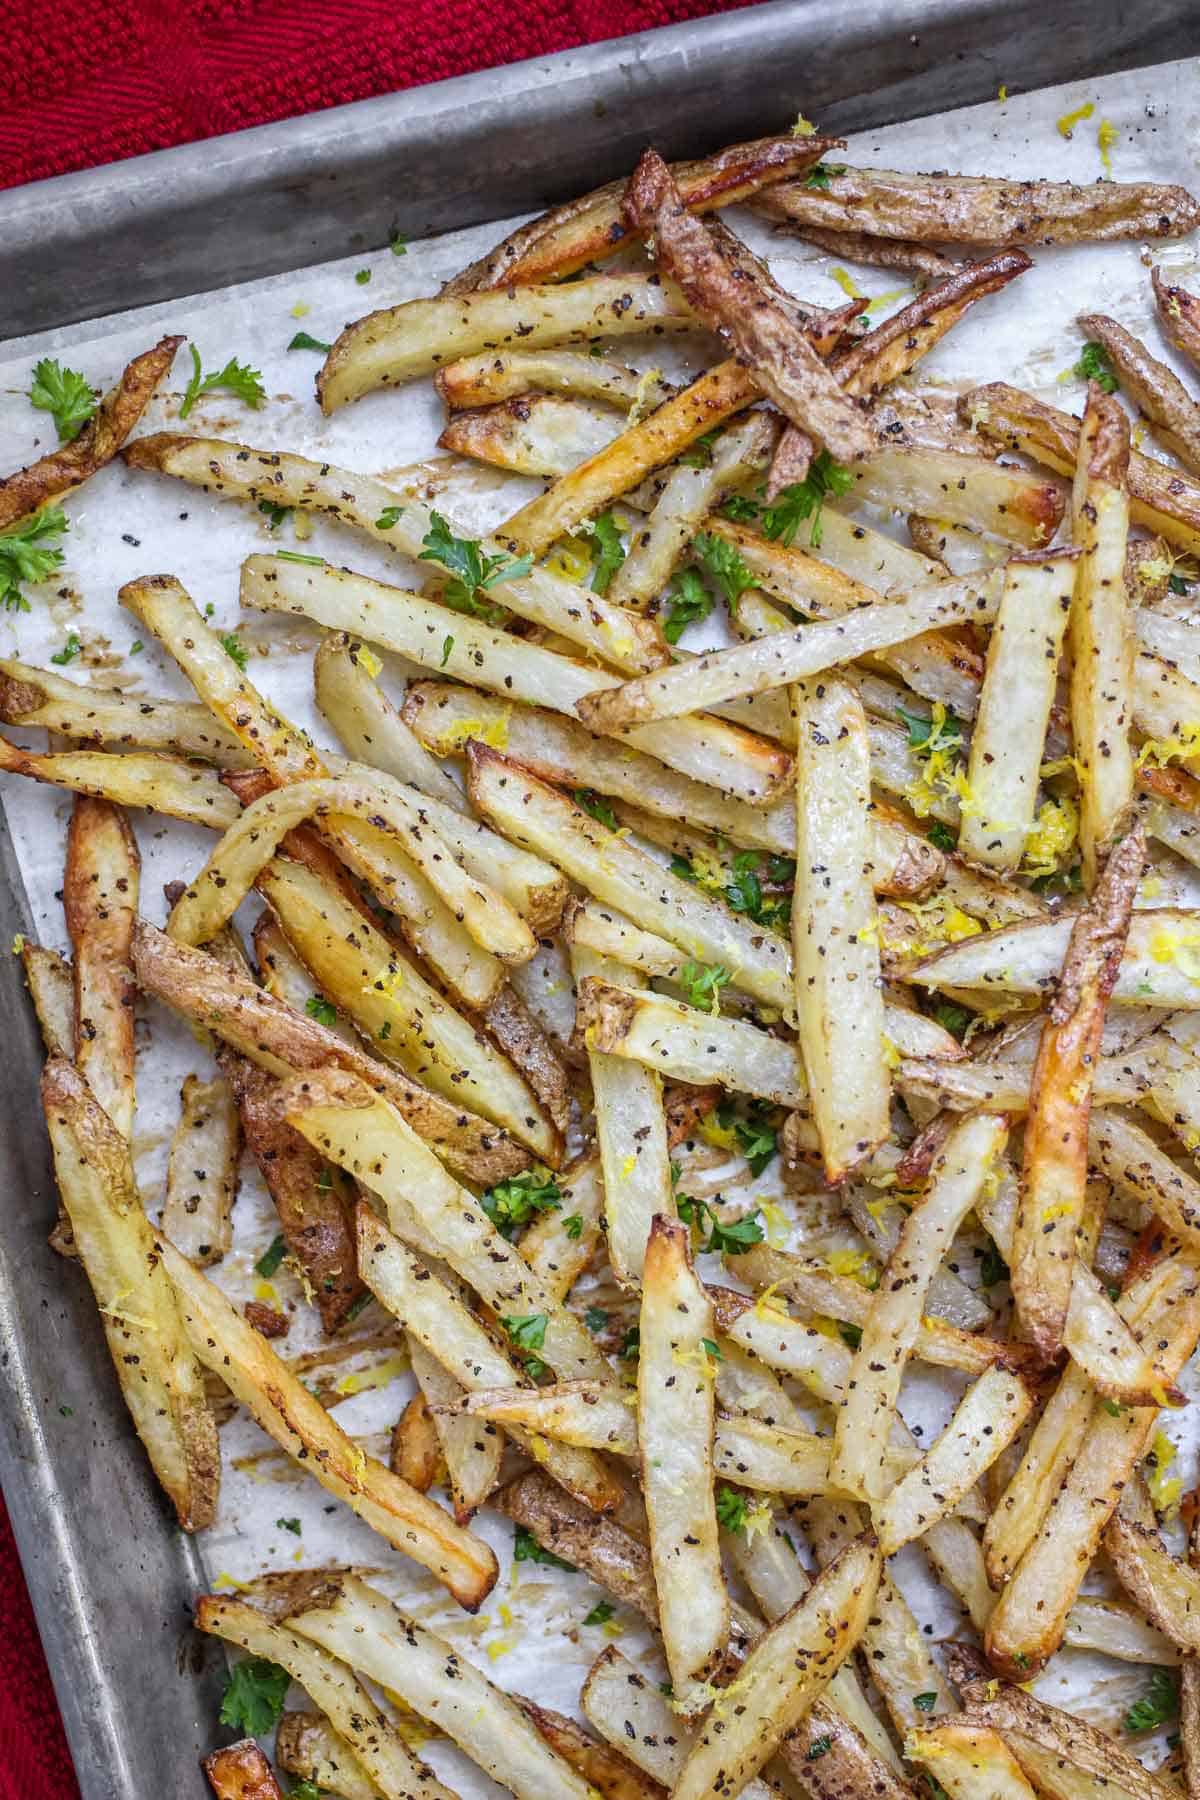 Lemon pepper fries topped with fresh parsley on a baking sheet lined with parchment paper.